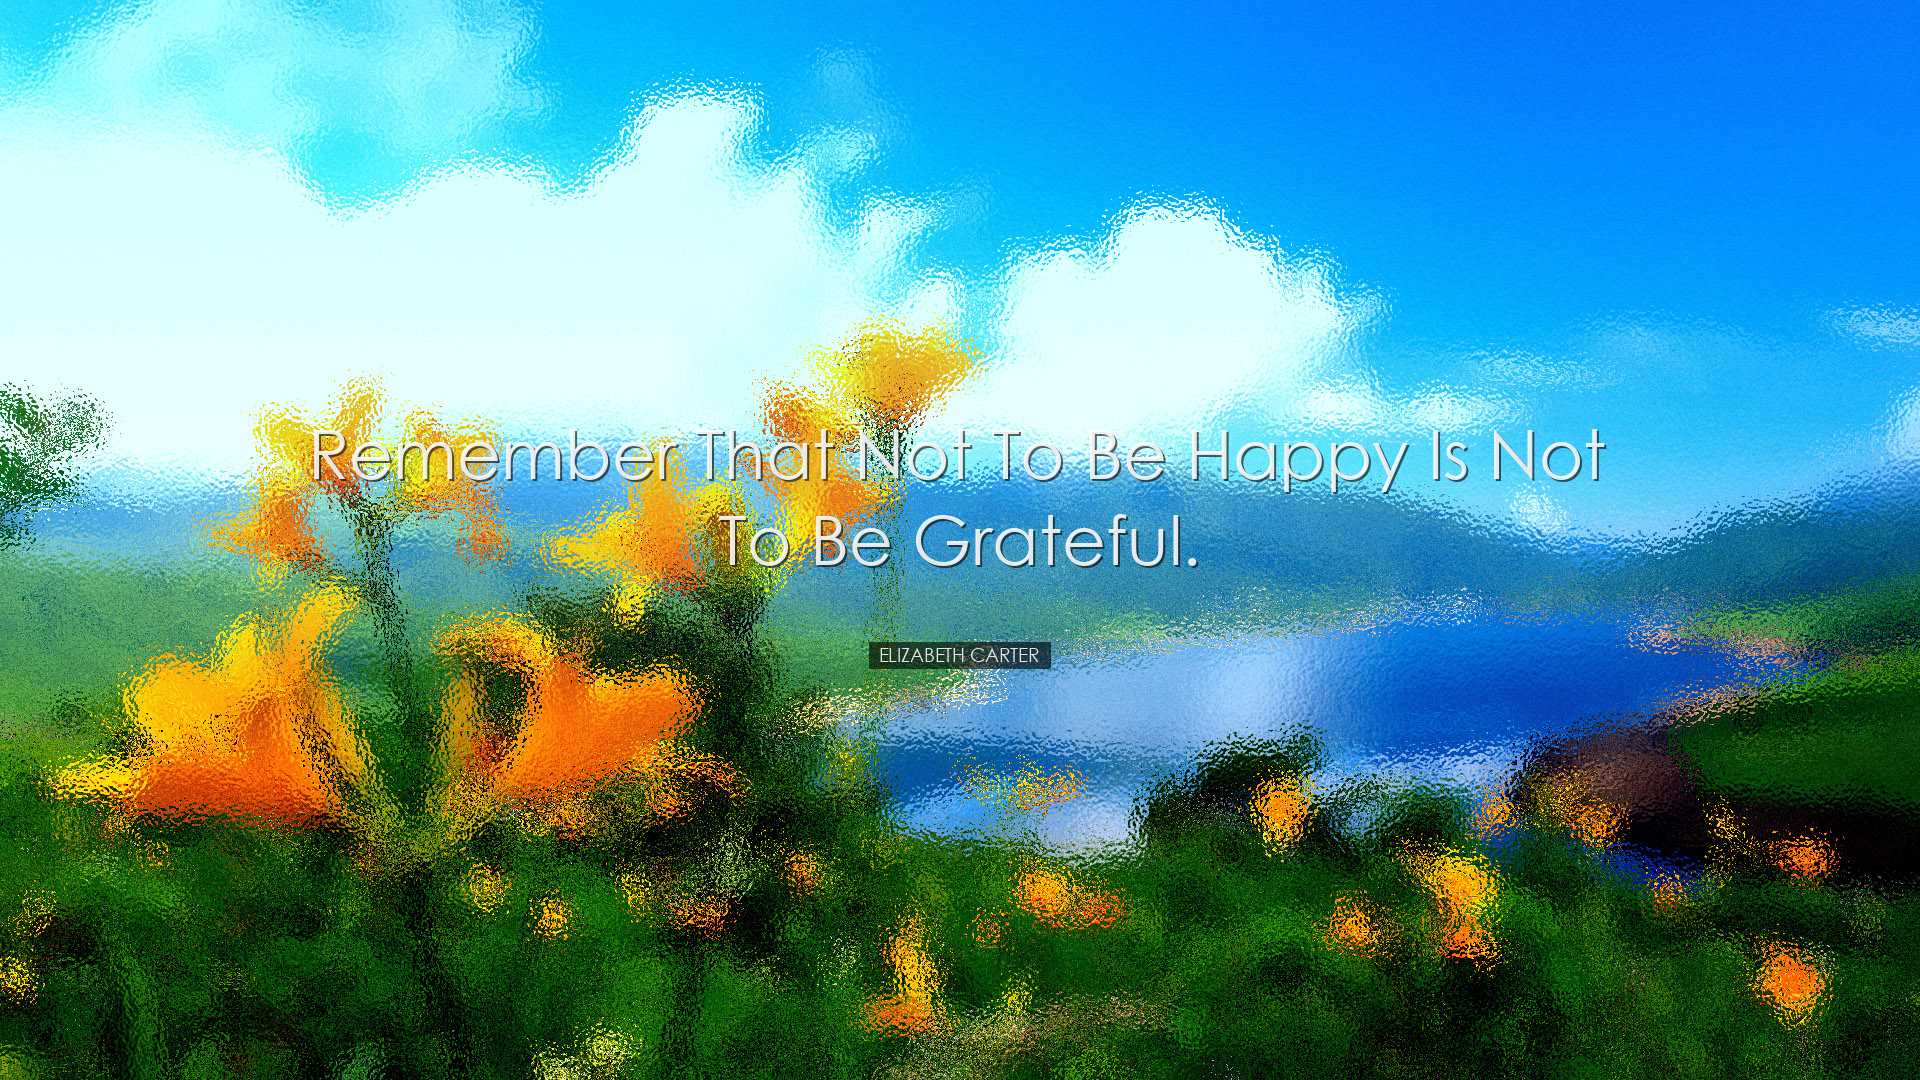 Remember that not to be happy is not to be grateful. - Elizabeth C